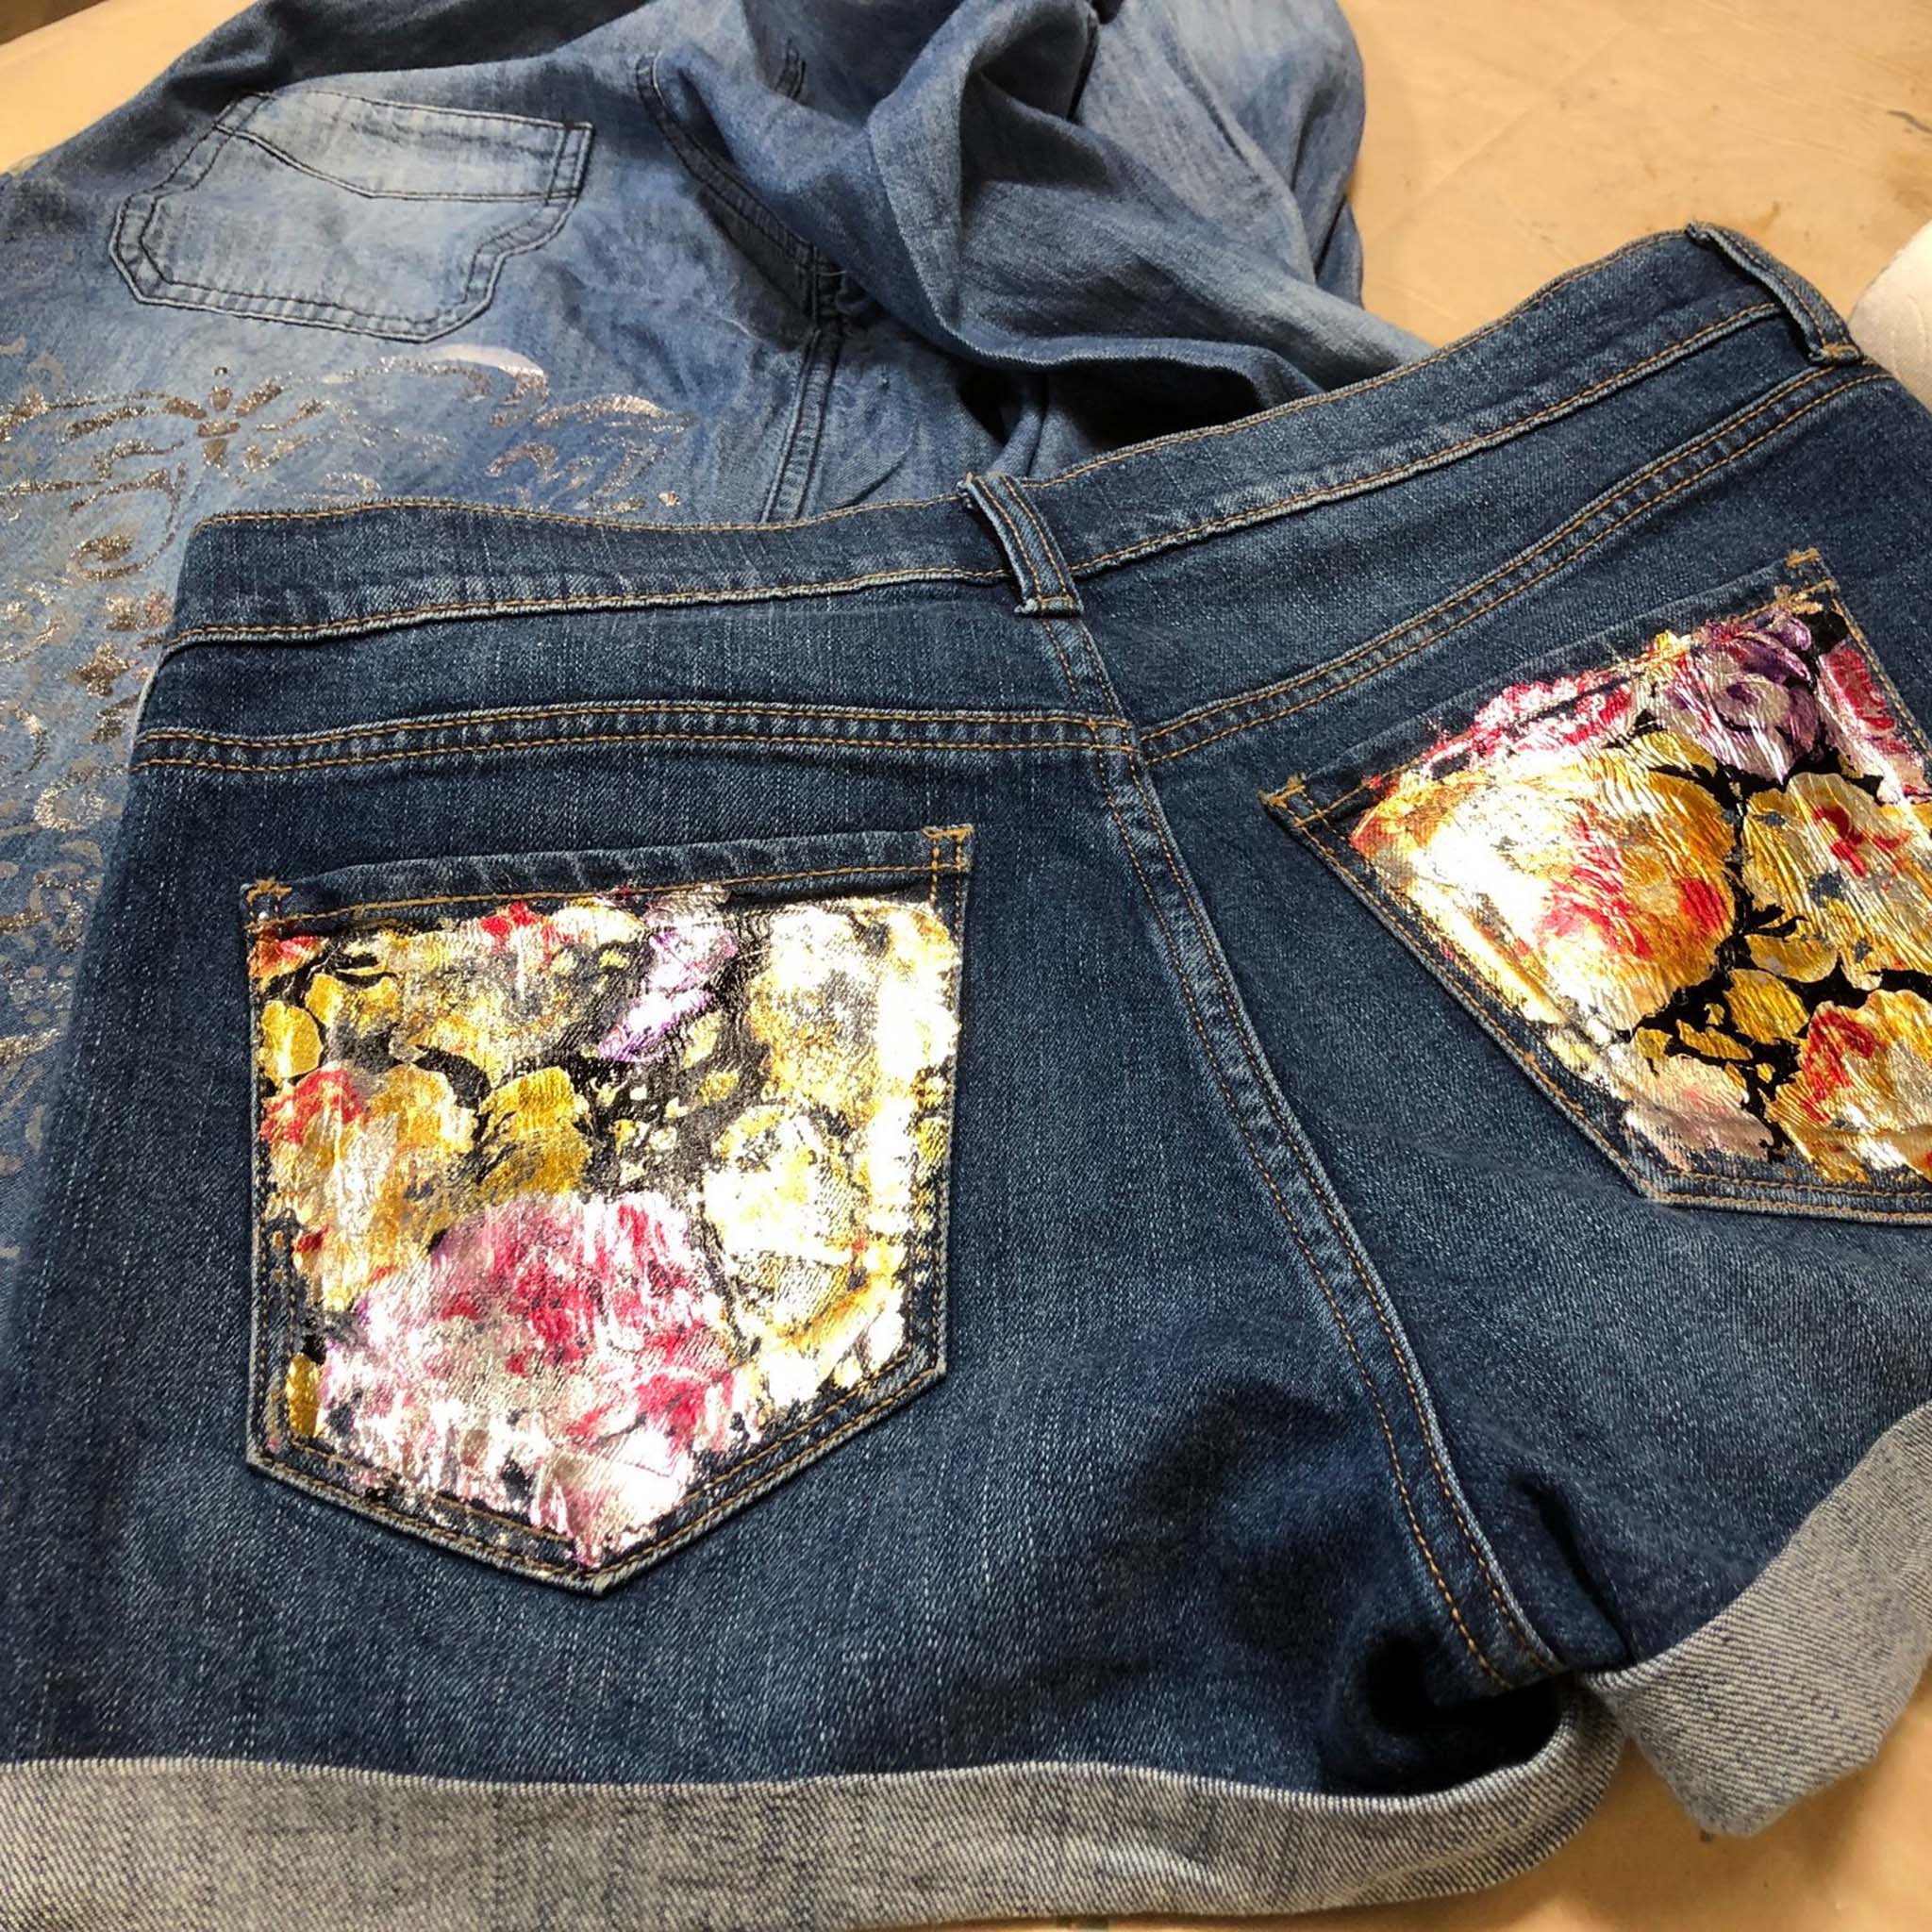 A pair of blue jean shorts features Artictic Painting Studio's Baylee Flowers metallic transfer foil on its back pockets.